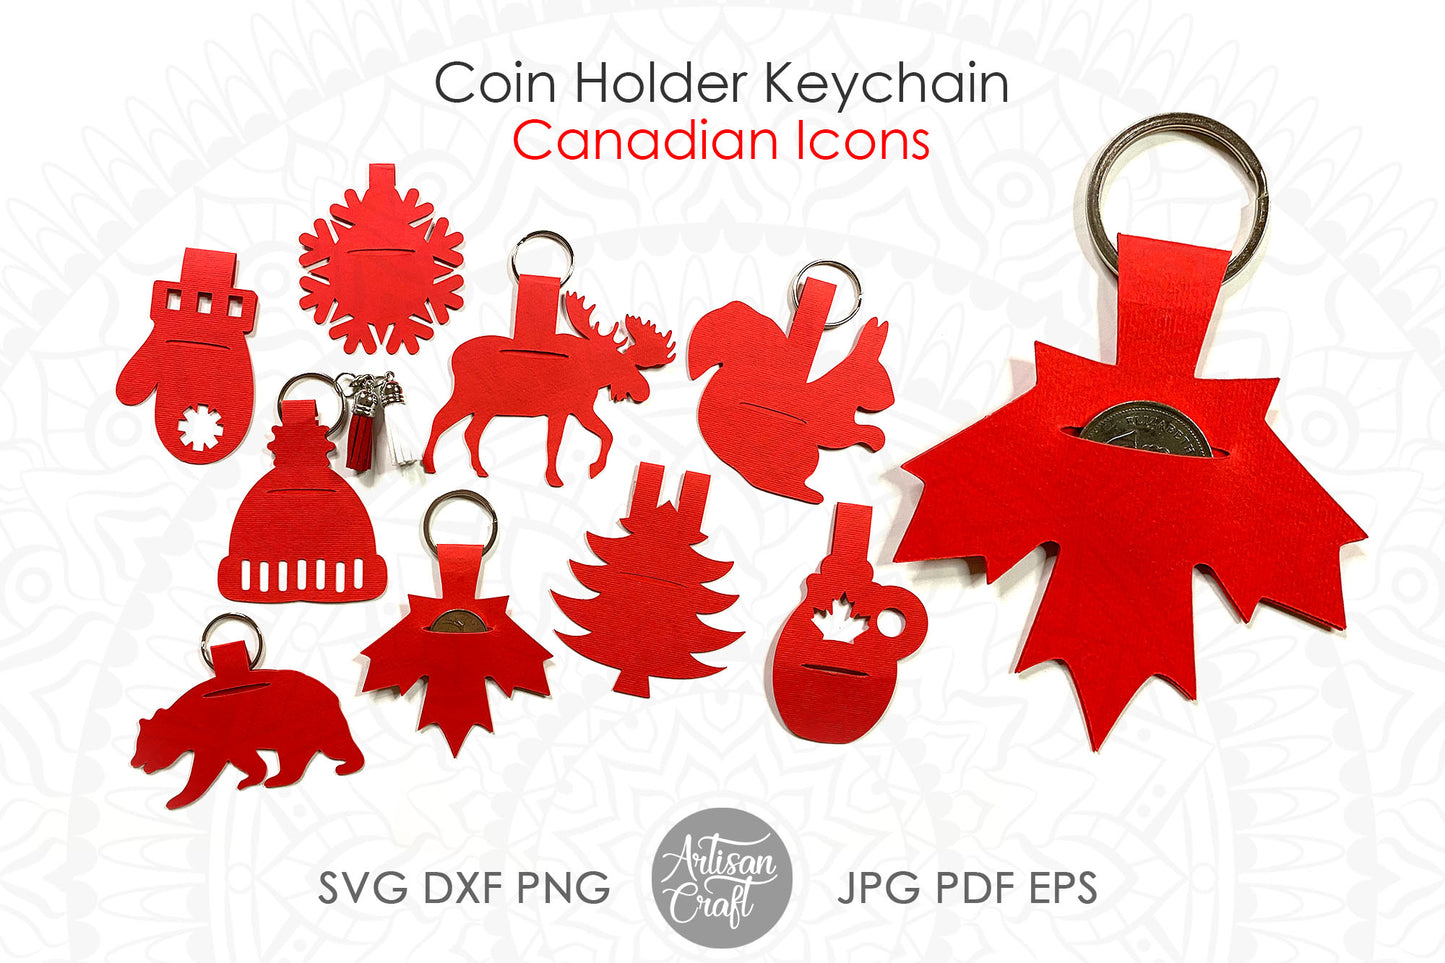 Coin holder keychain showing Canadian icons